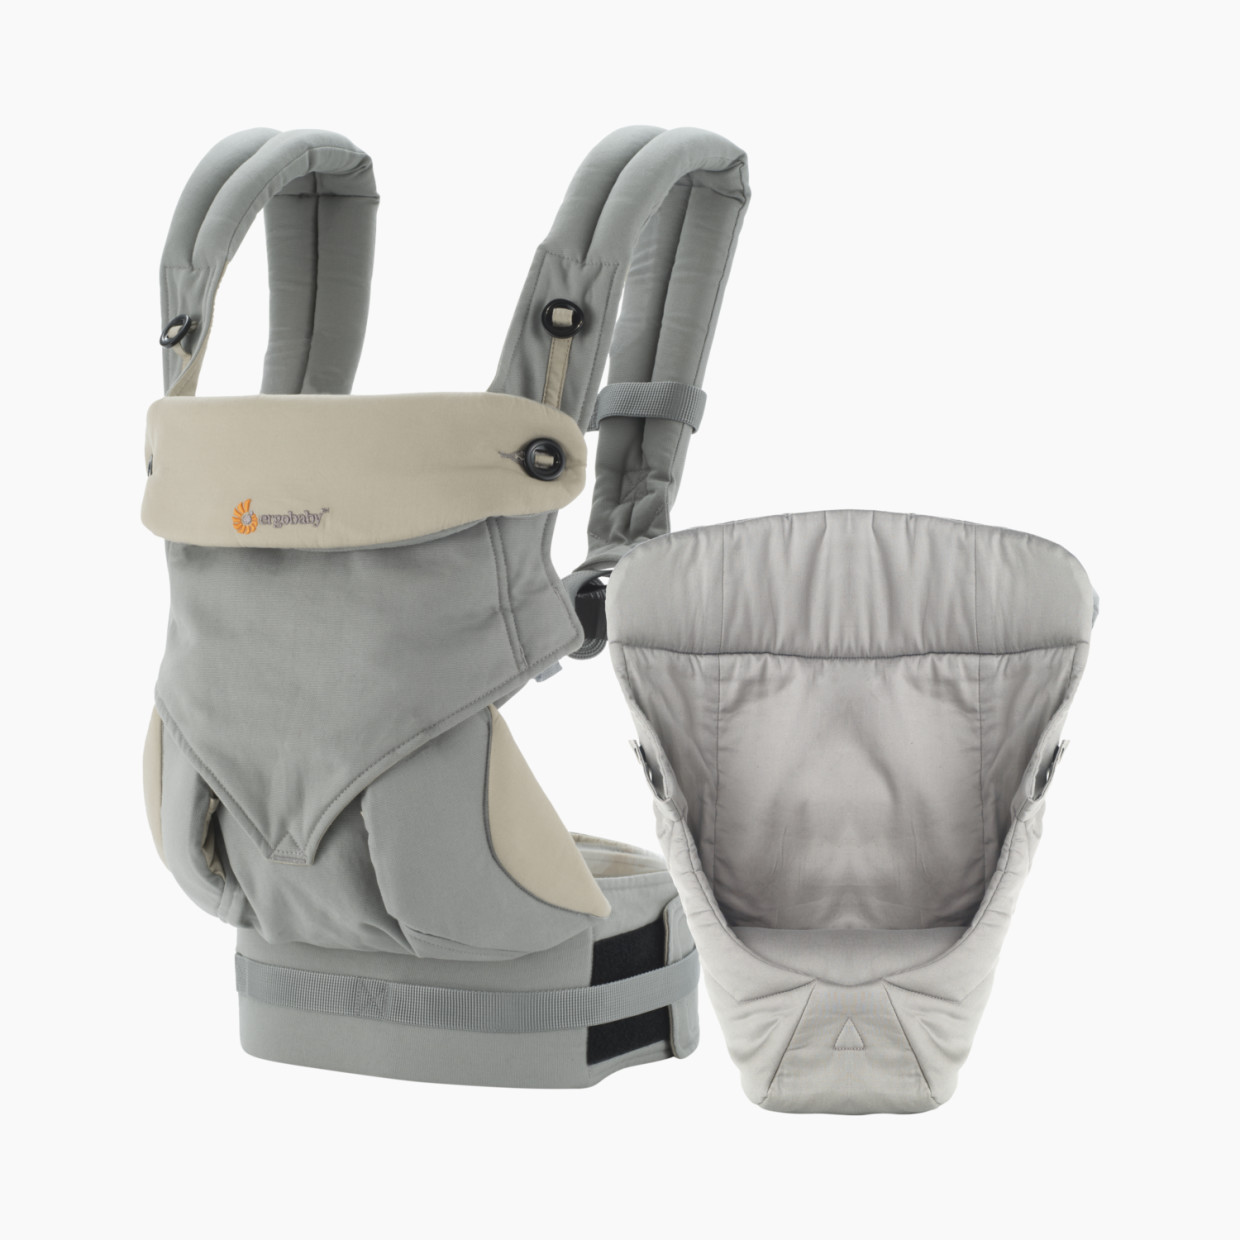 Ergobaby 360 Baby Carrier Bundle of Joy - Gray-DISCONTINUED.